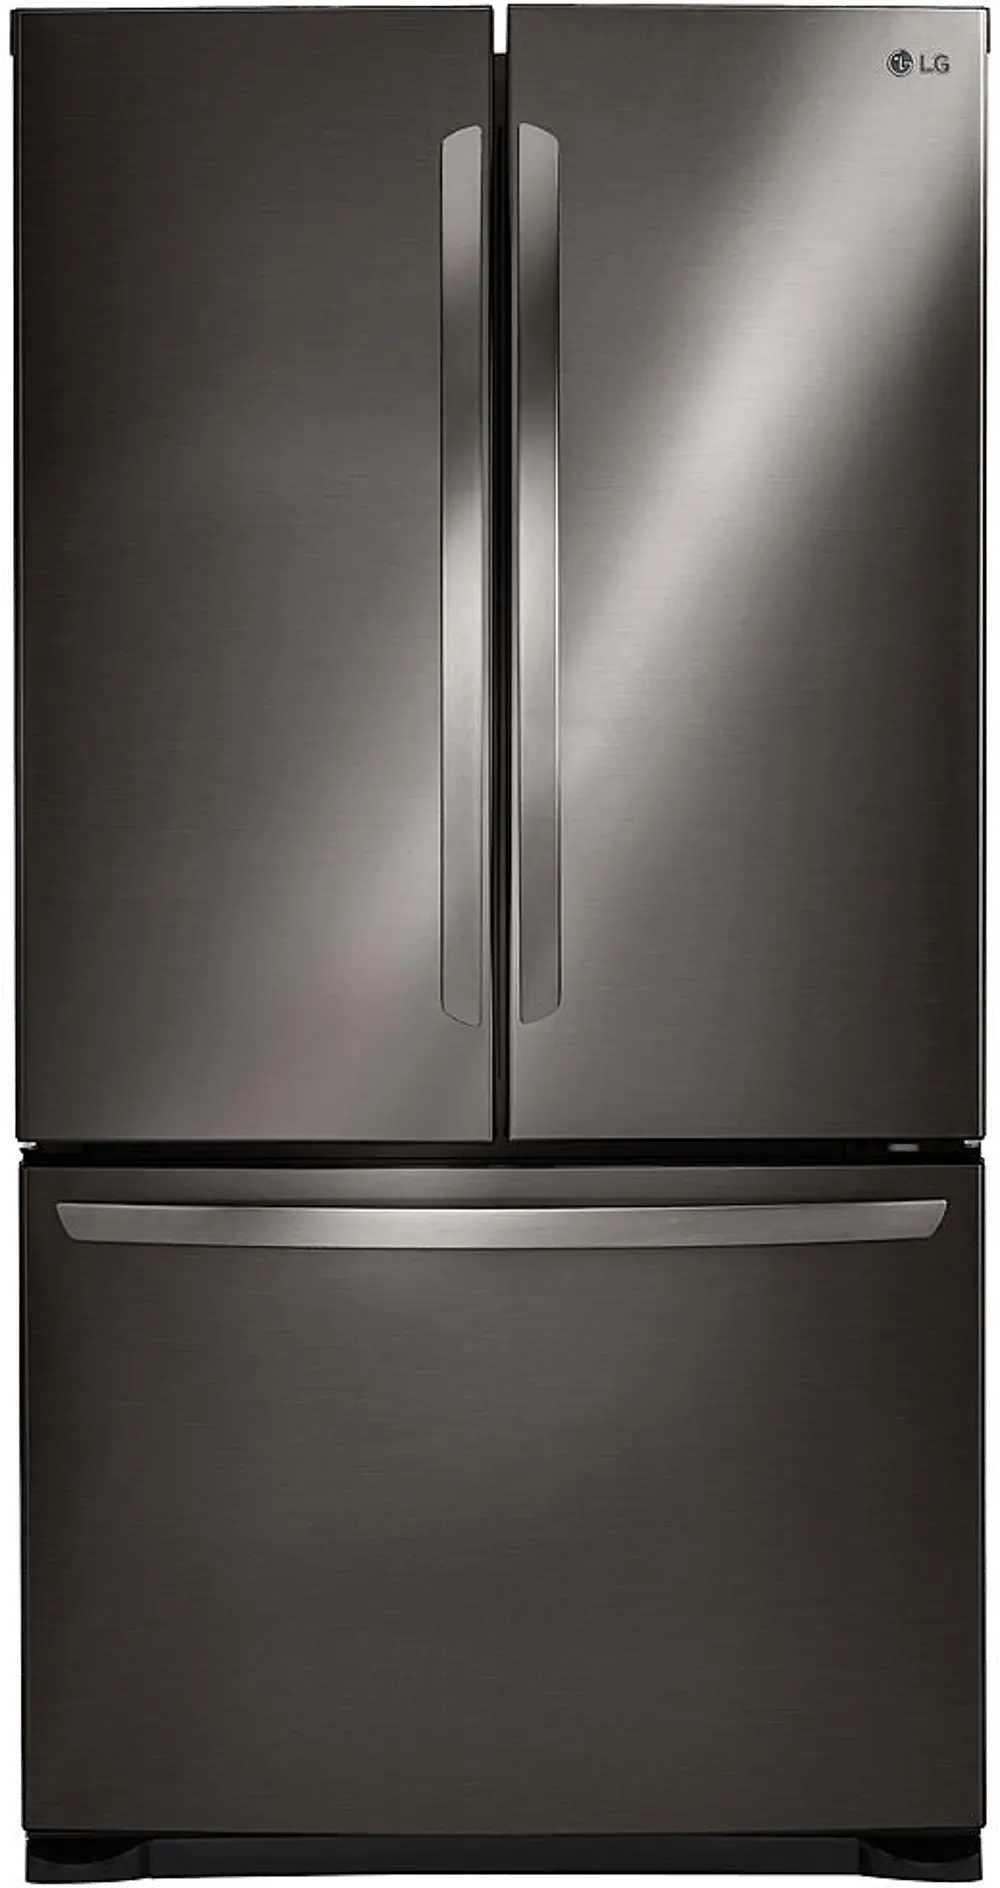 LFCS25426D LG French Door Refrigerator with Smart Cooling System - 36 Inch PrintProof Black Stainless Steel-1